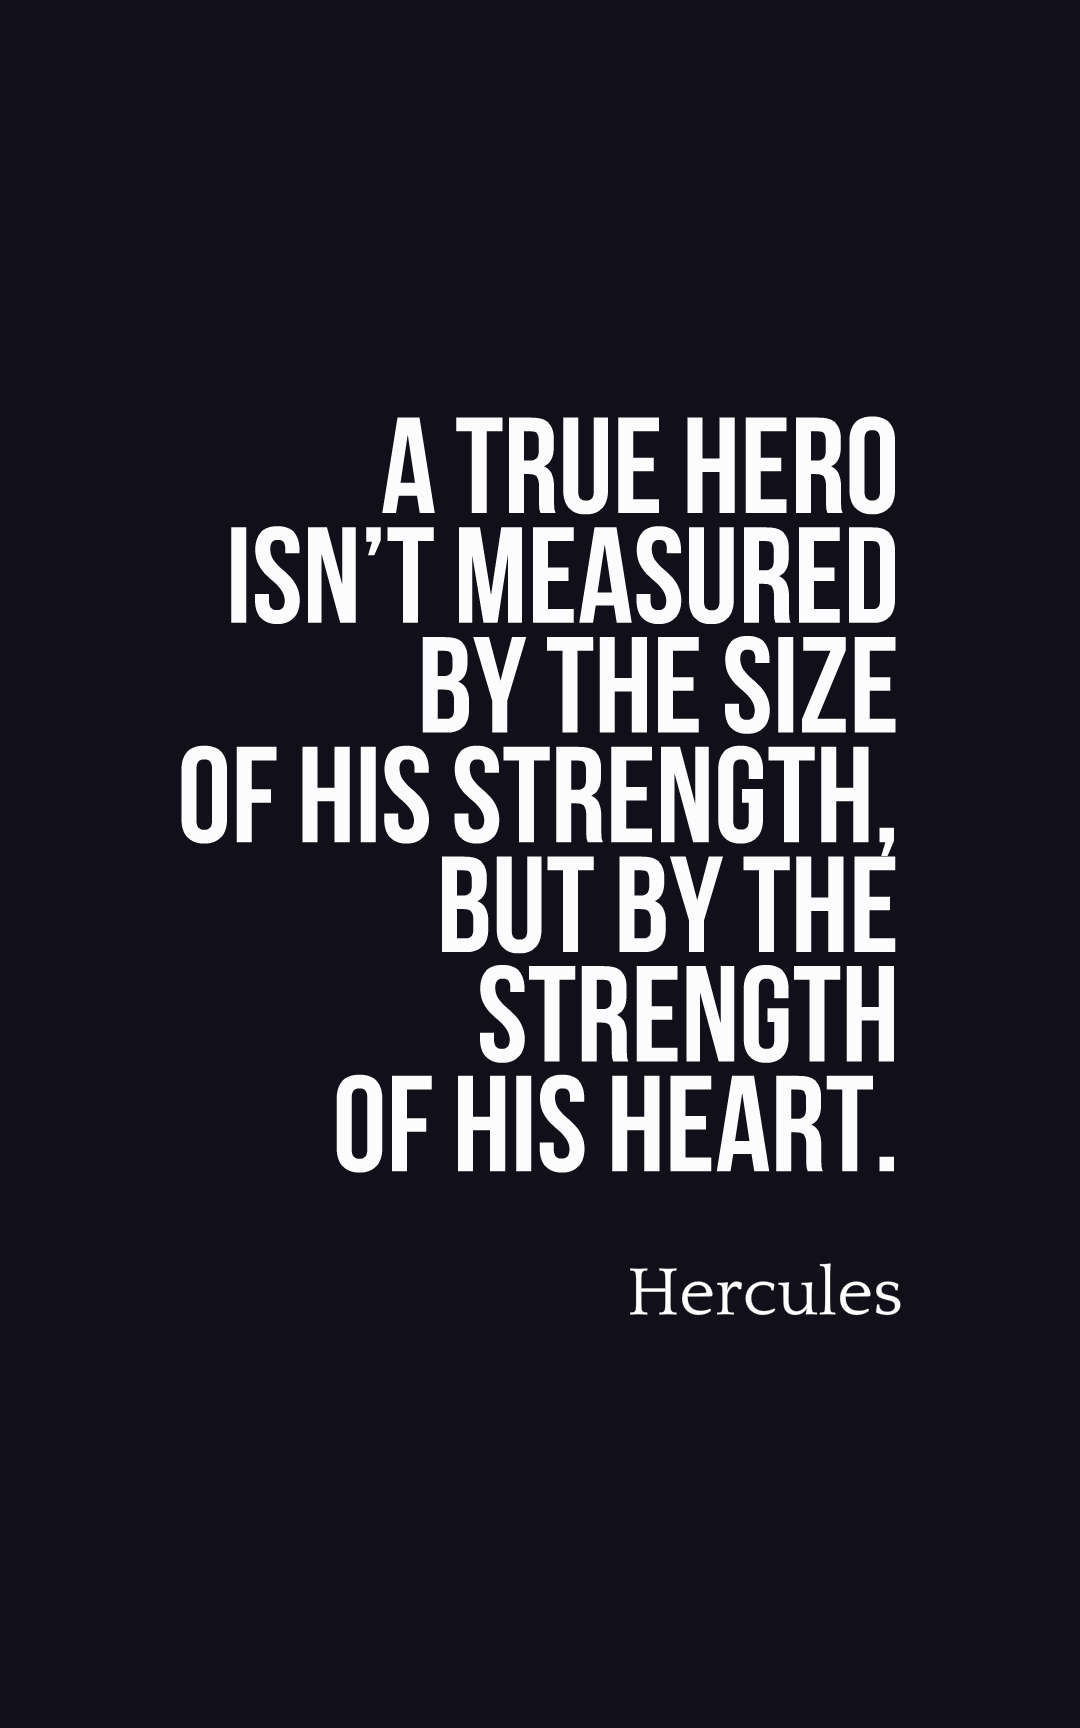 A true hero isn’t measured by the size of his strength, but by the strength of his heart.